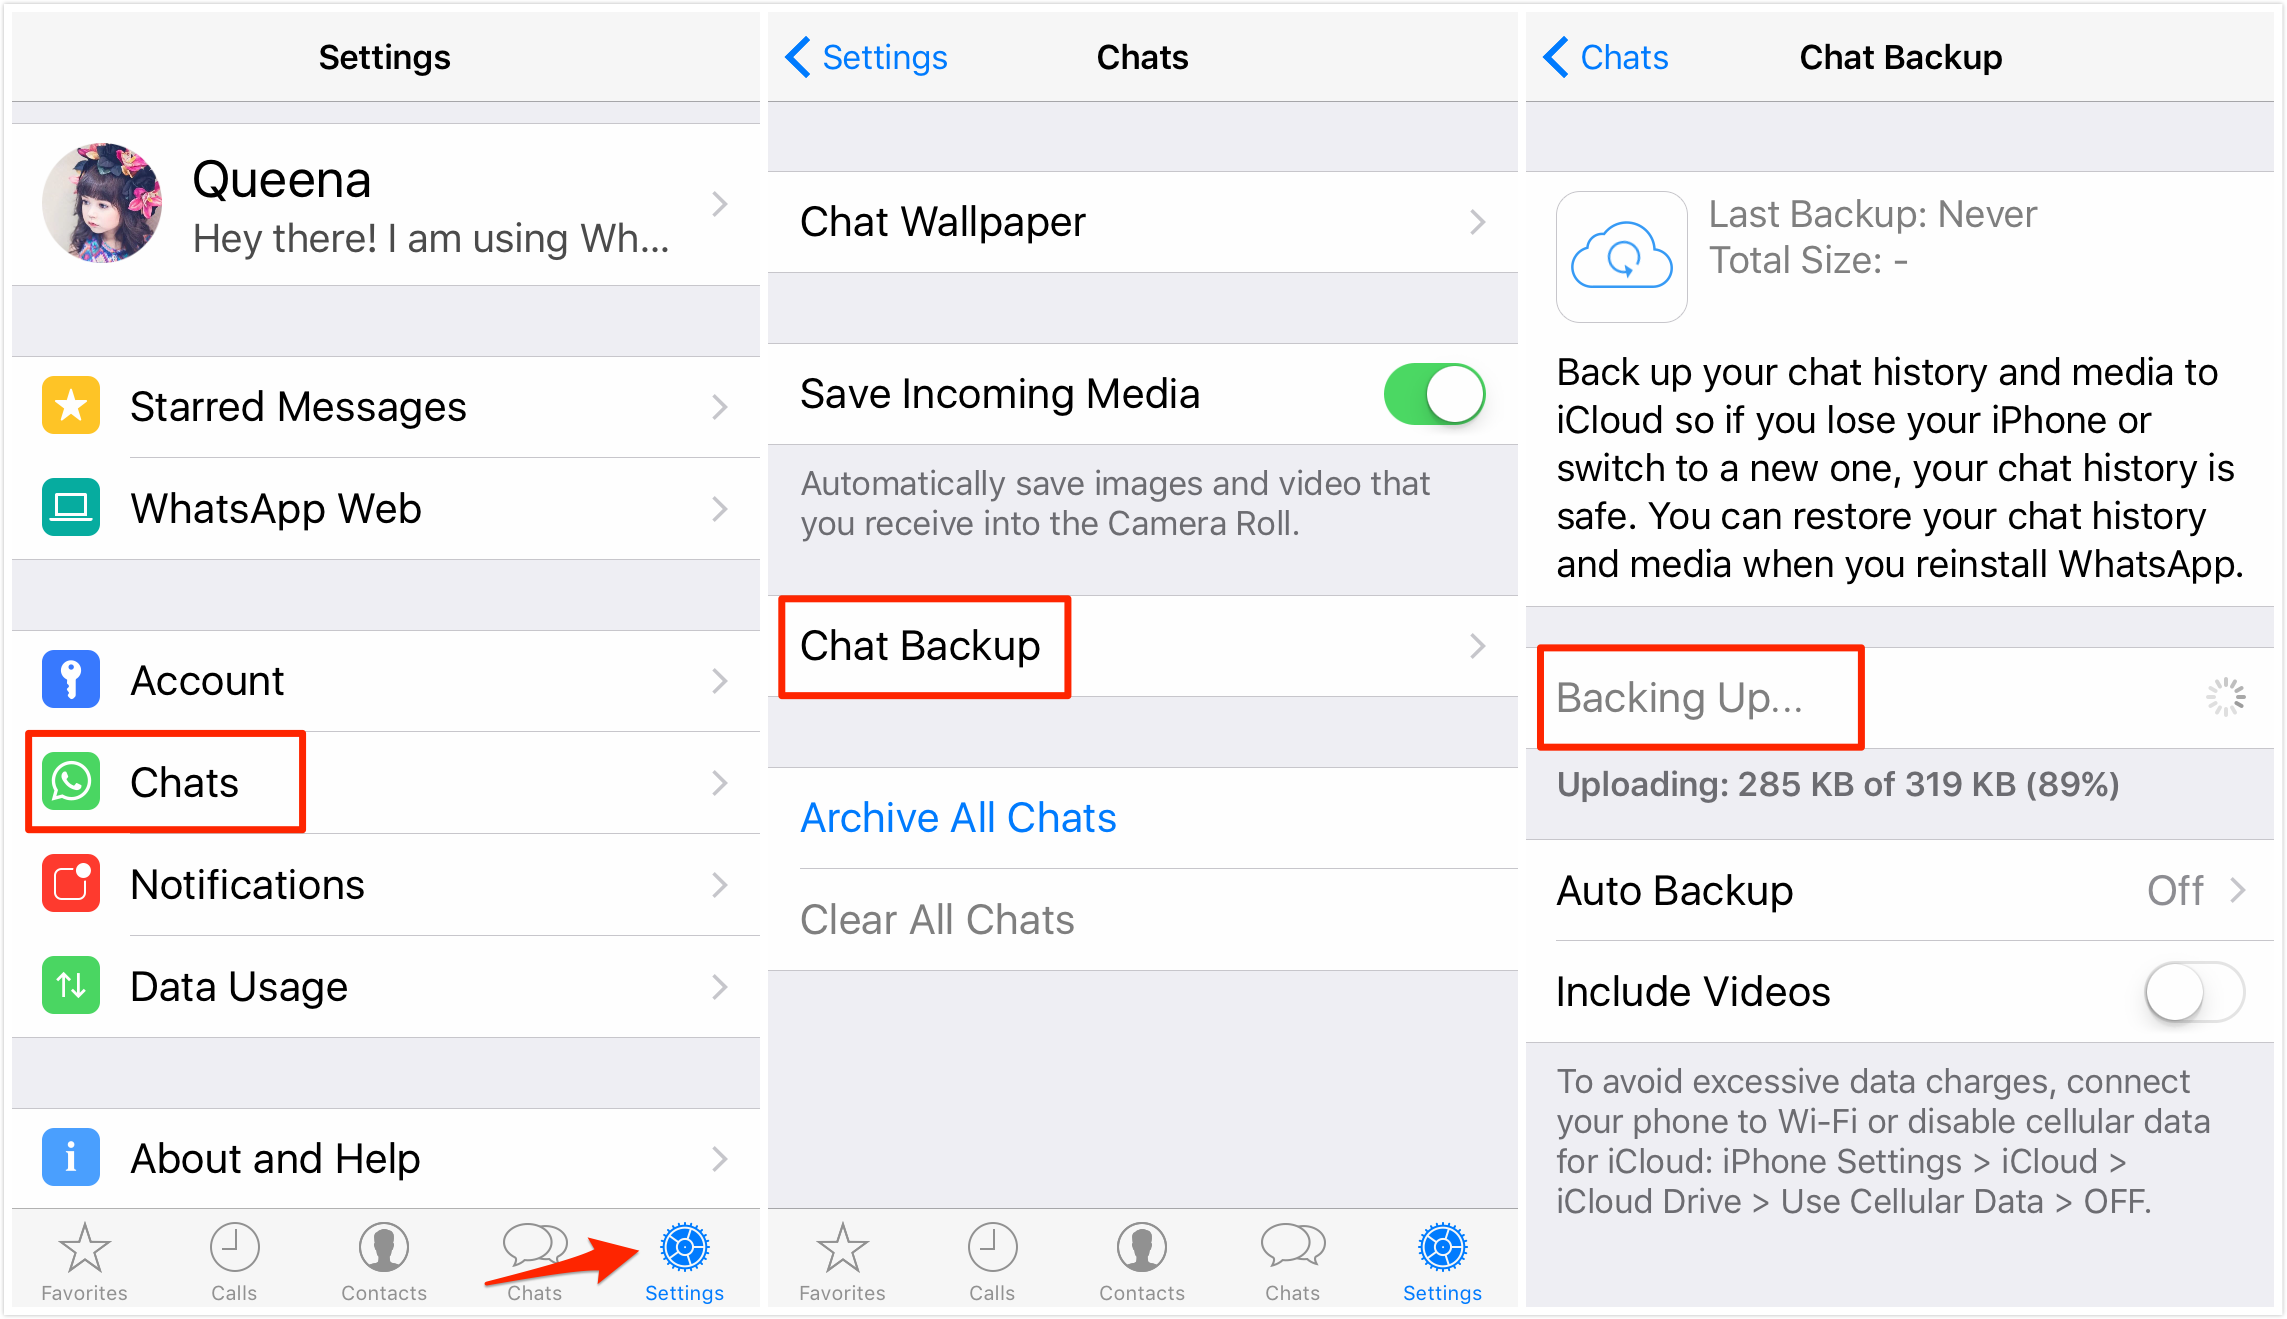 how to download whatsapp backup from google drive to my pc